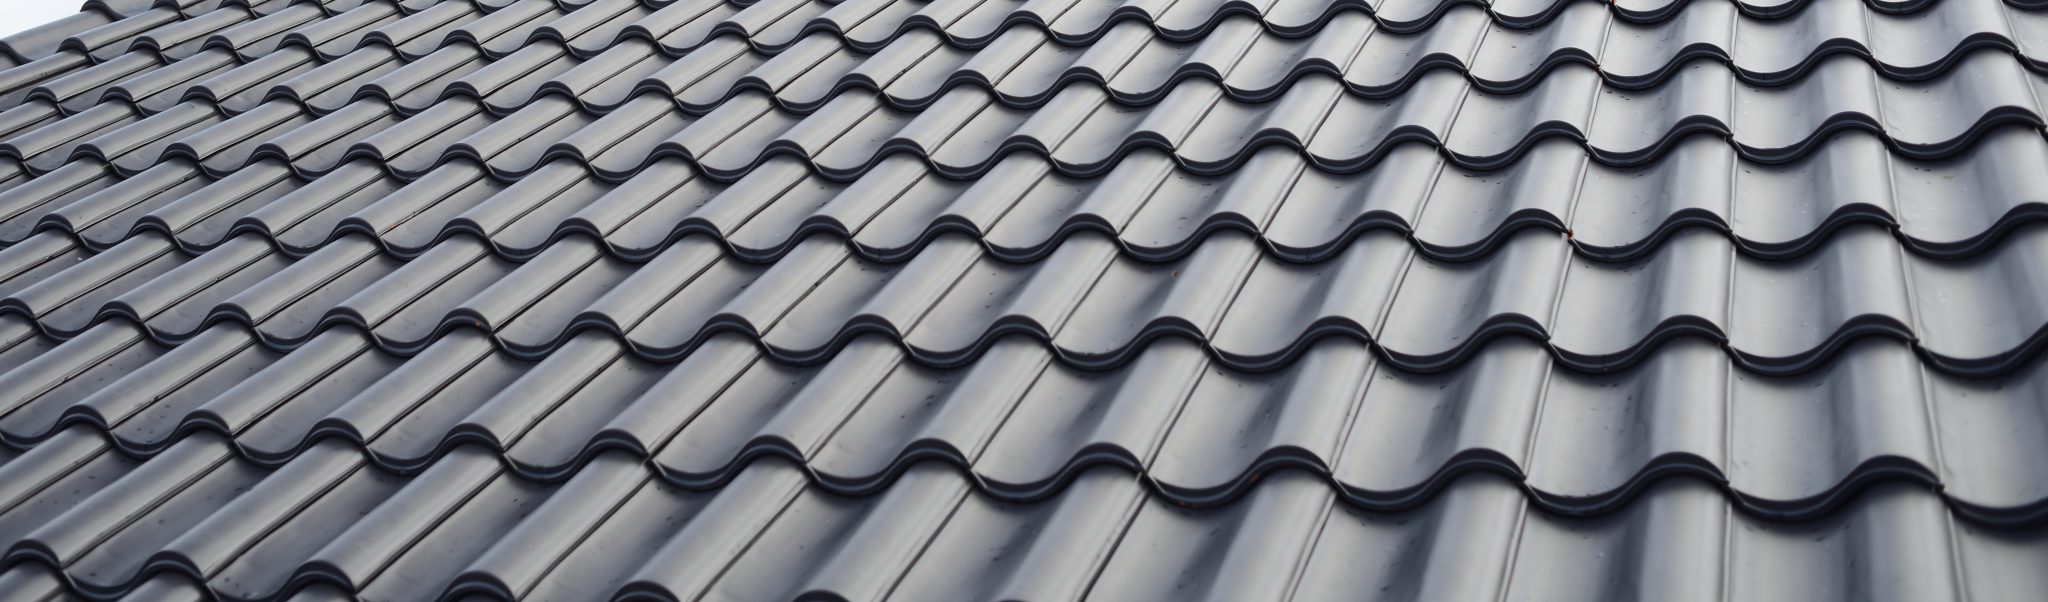 11 Reasons to Choose Metal Roofing Solutions for Your Miami Home